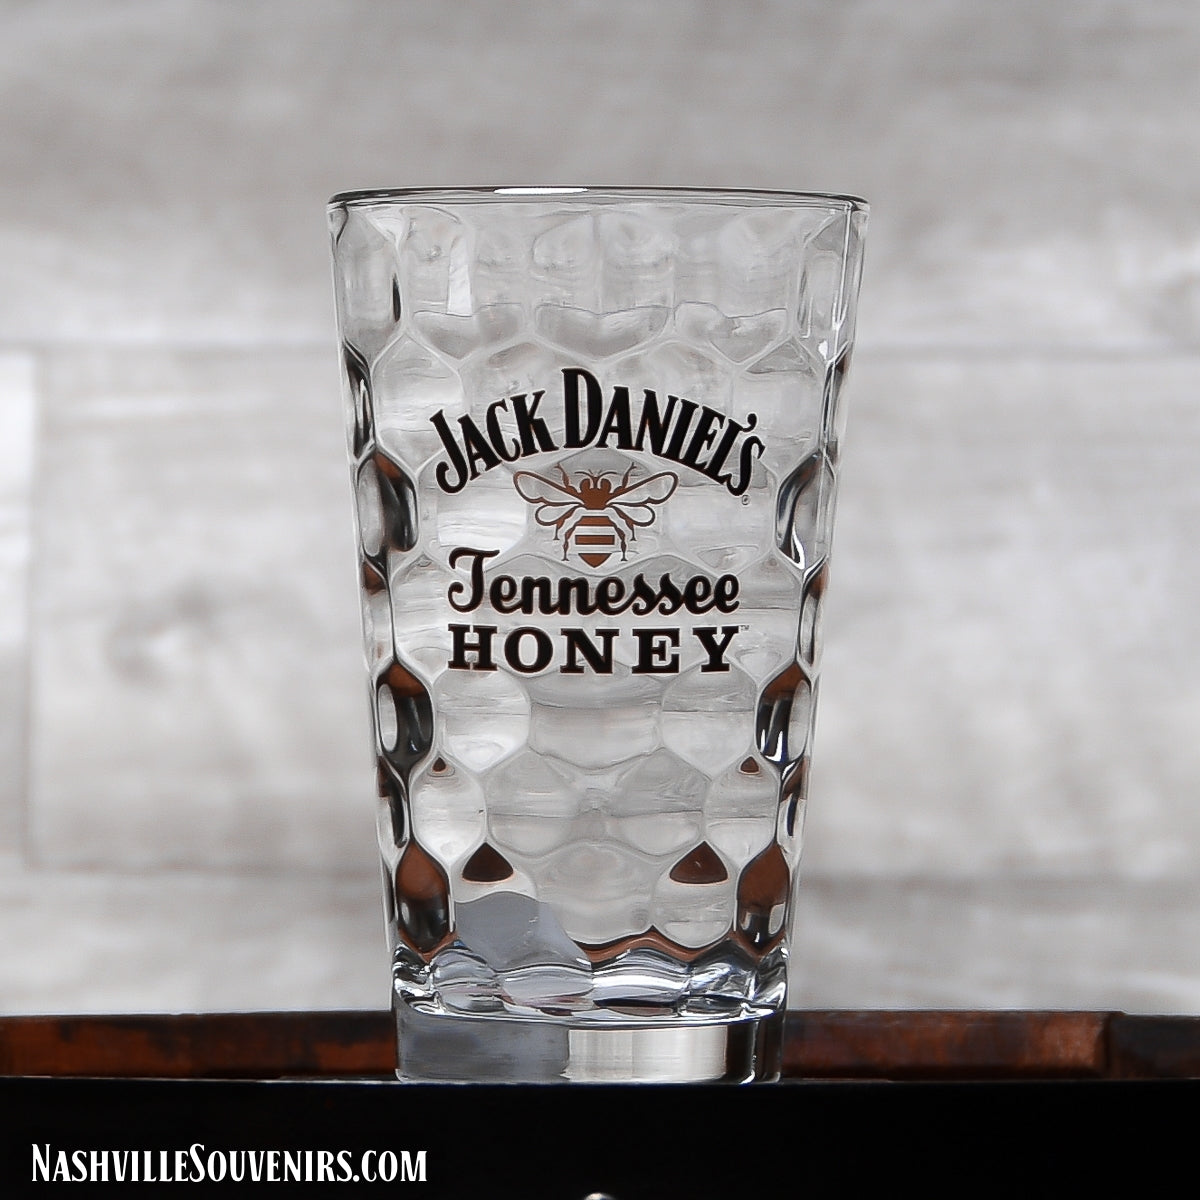 Officially licensed Jack Daniels Tennessee Honey Mixing Glass. Get yours today with FREE SHIPPING on all US orders over $75!